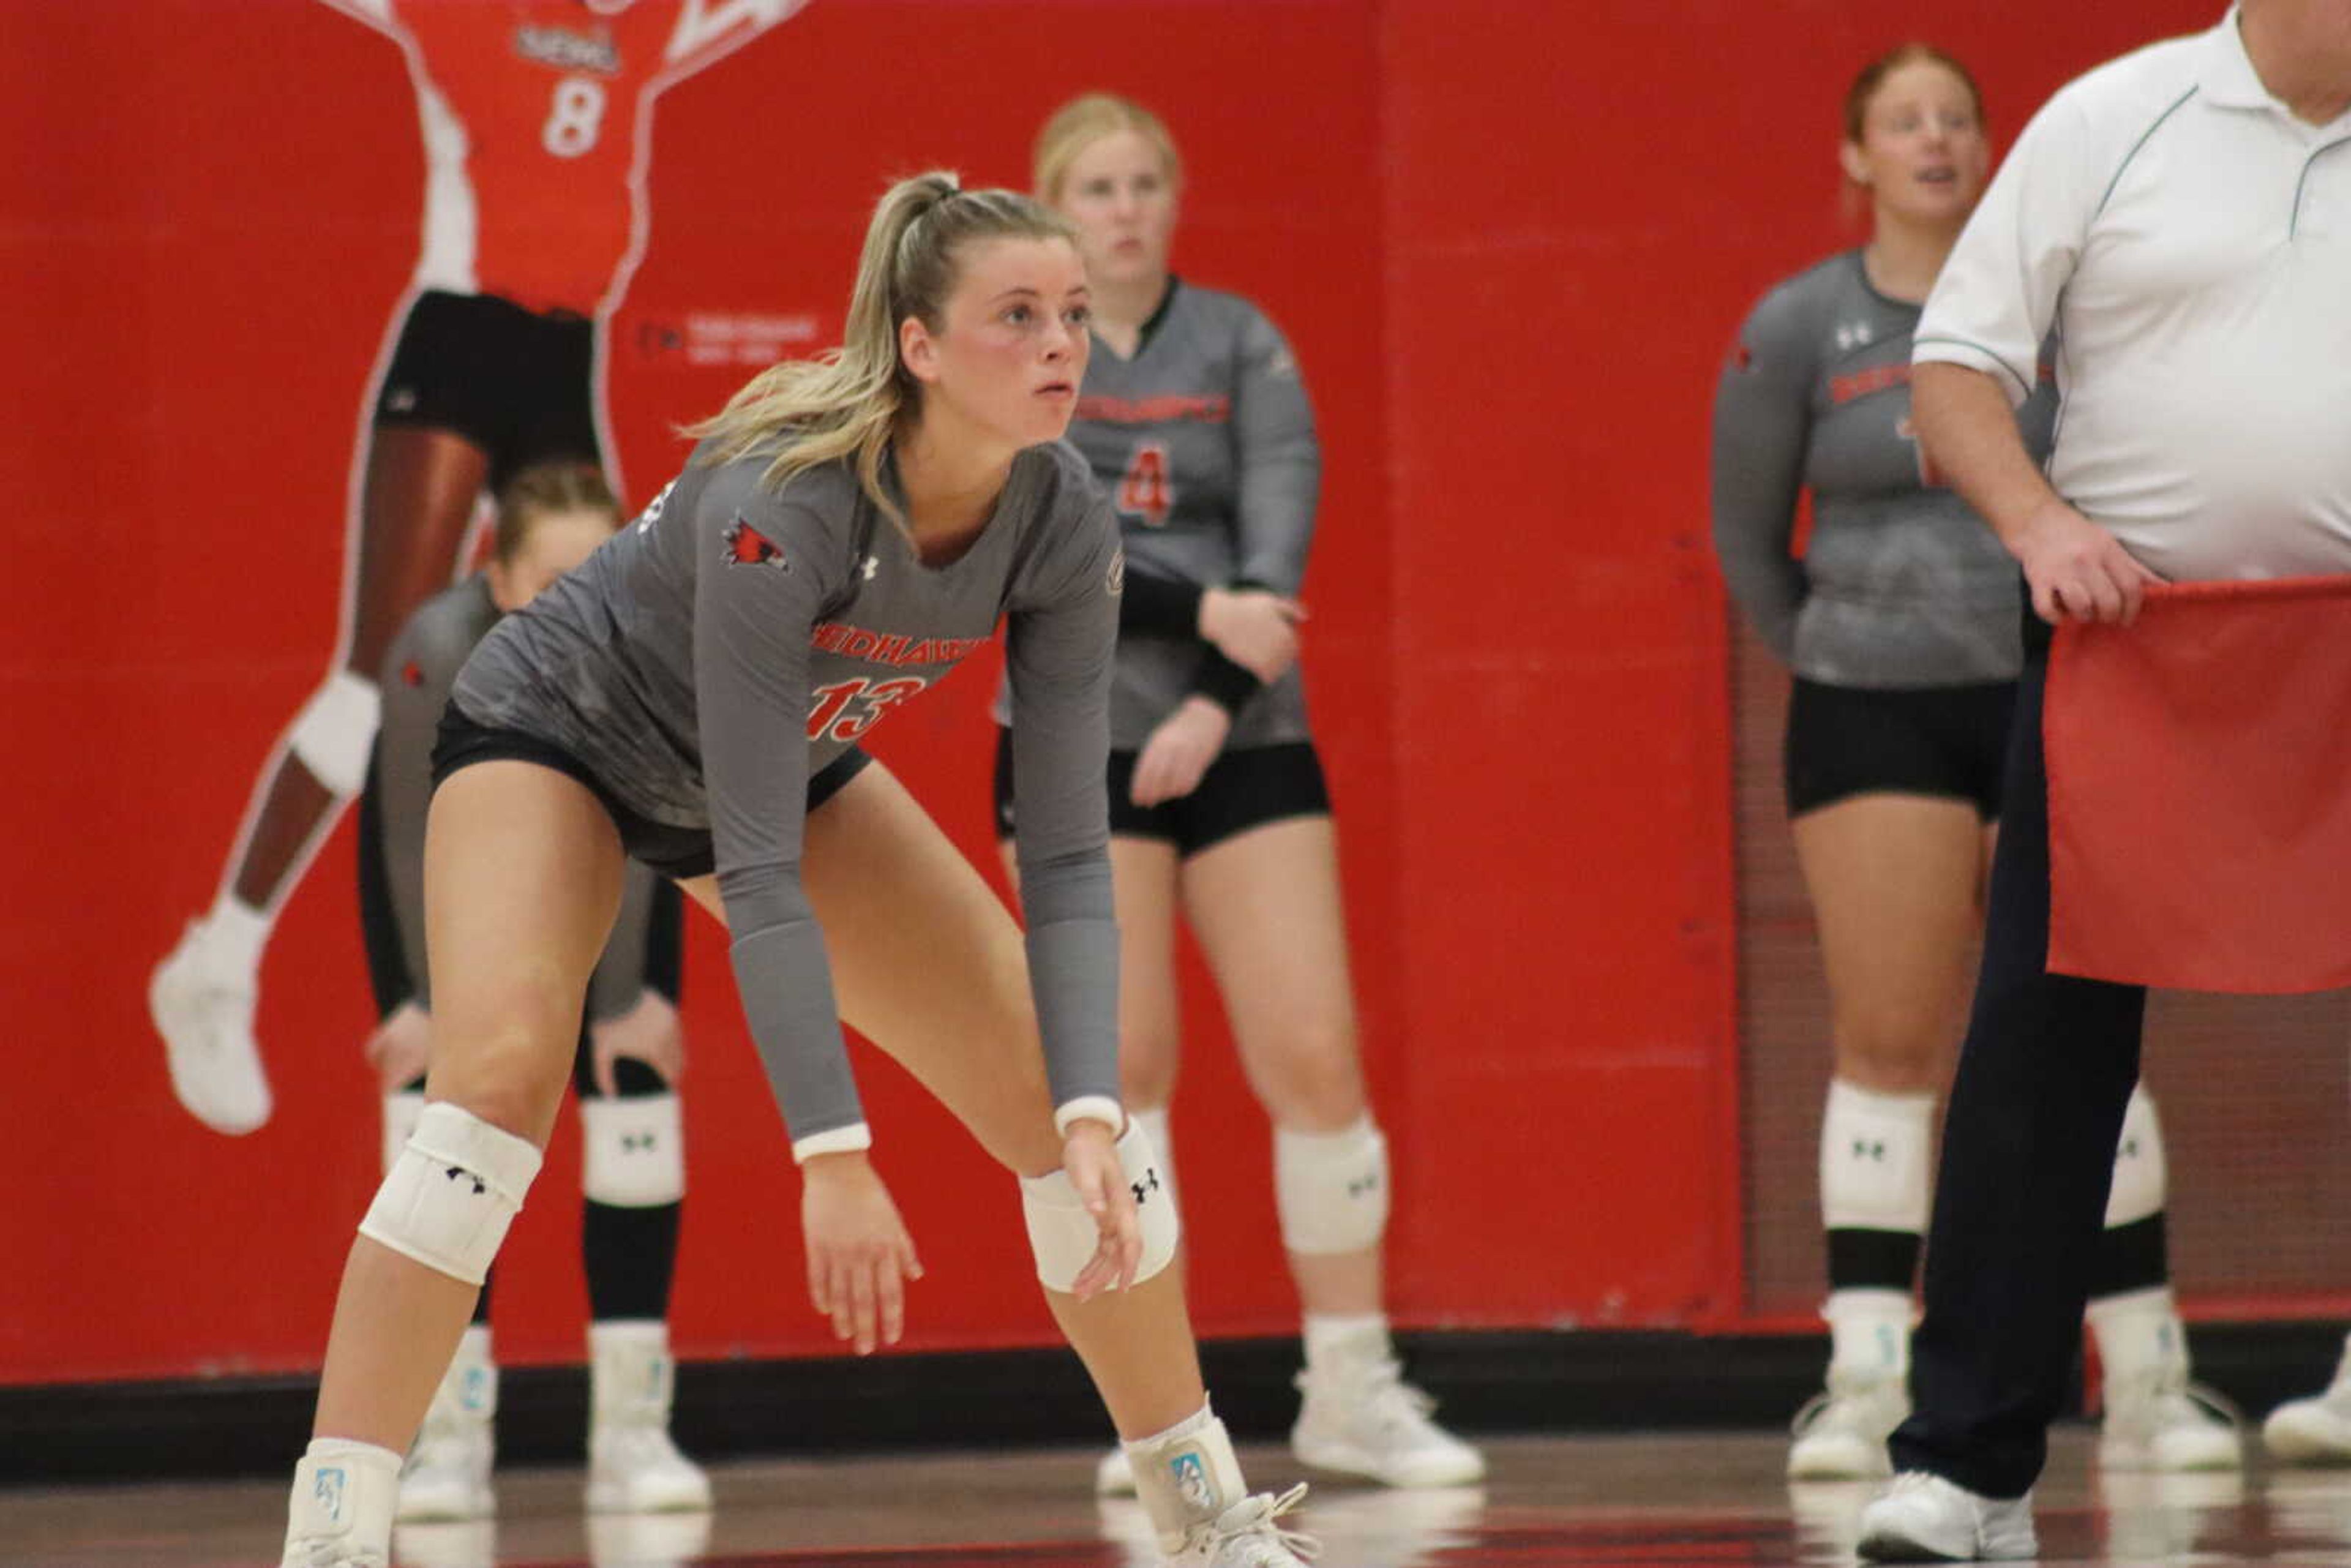 Senior outside hitter Kayla Closset (13) locks in as she prepares for a play, while teammates watch on in the background.